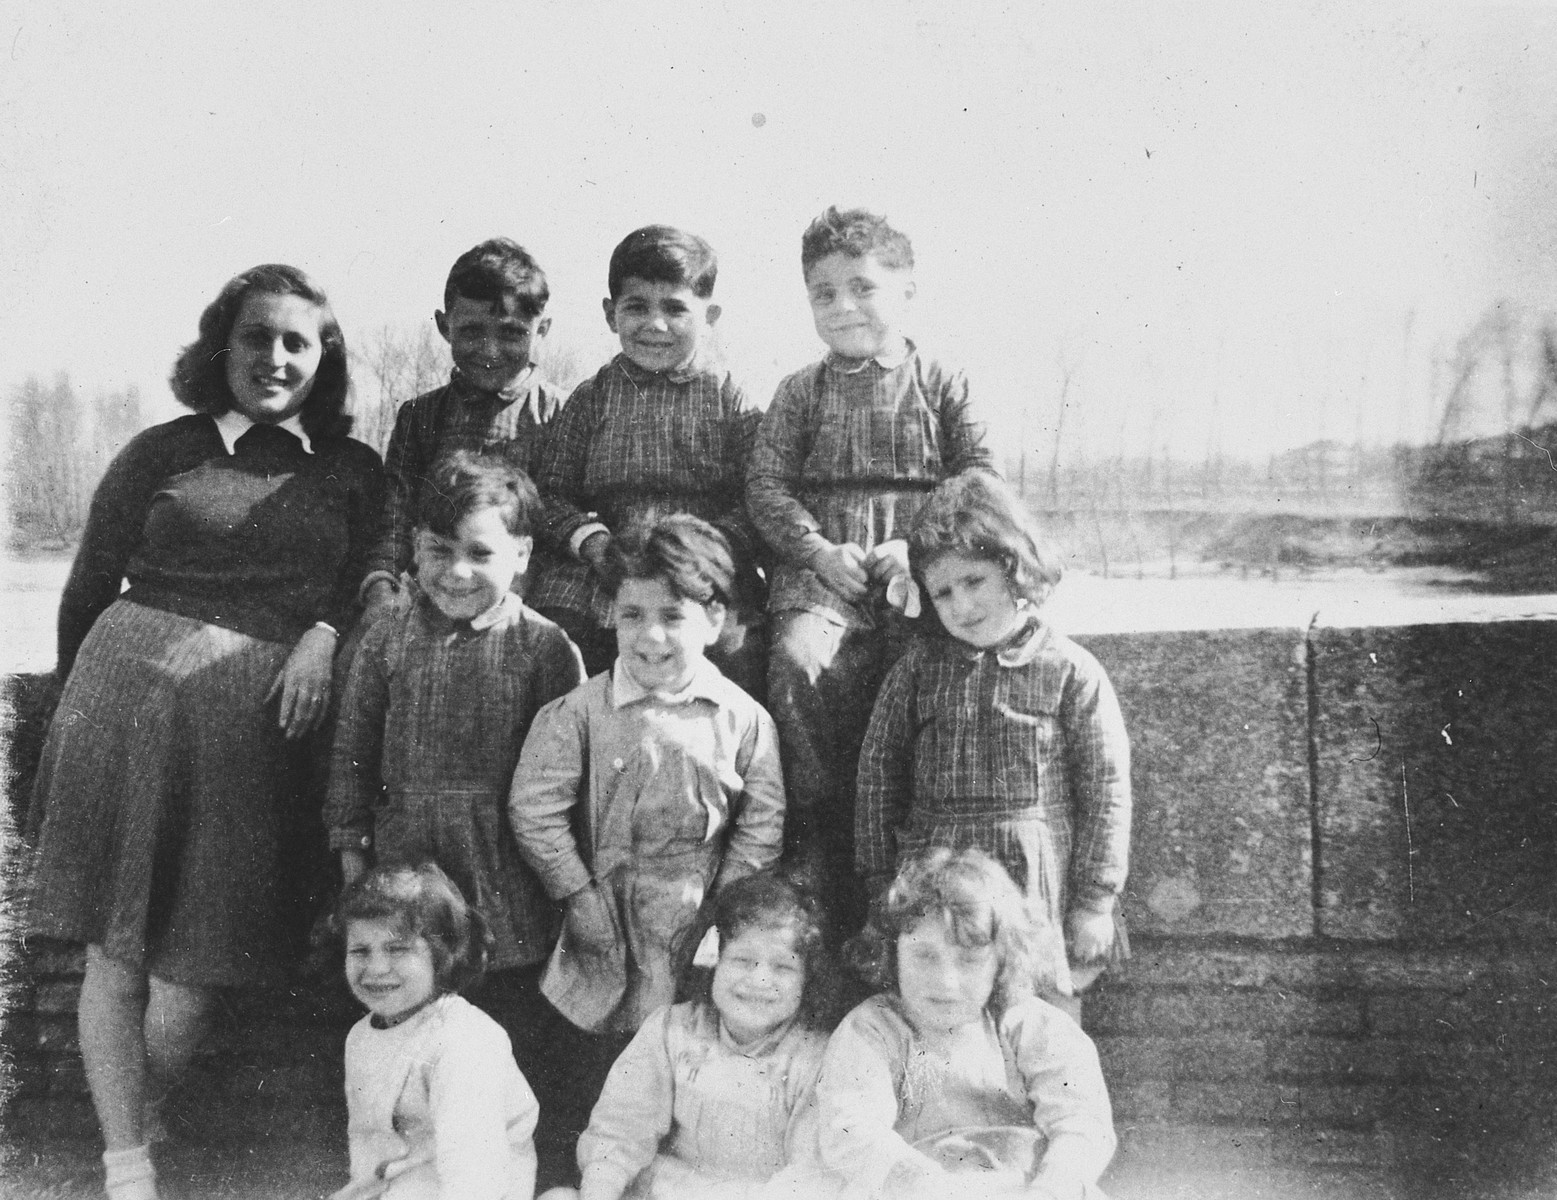 A Jewish teenager poses for a group portrait with the young children she is helping teach the alphabet to in Vic-sur-Cere.

Pictured standing on the left is the donor, Ruth Strauss.